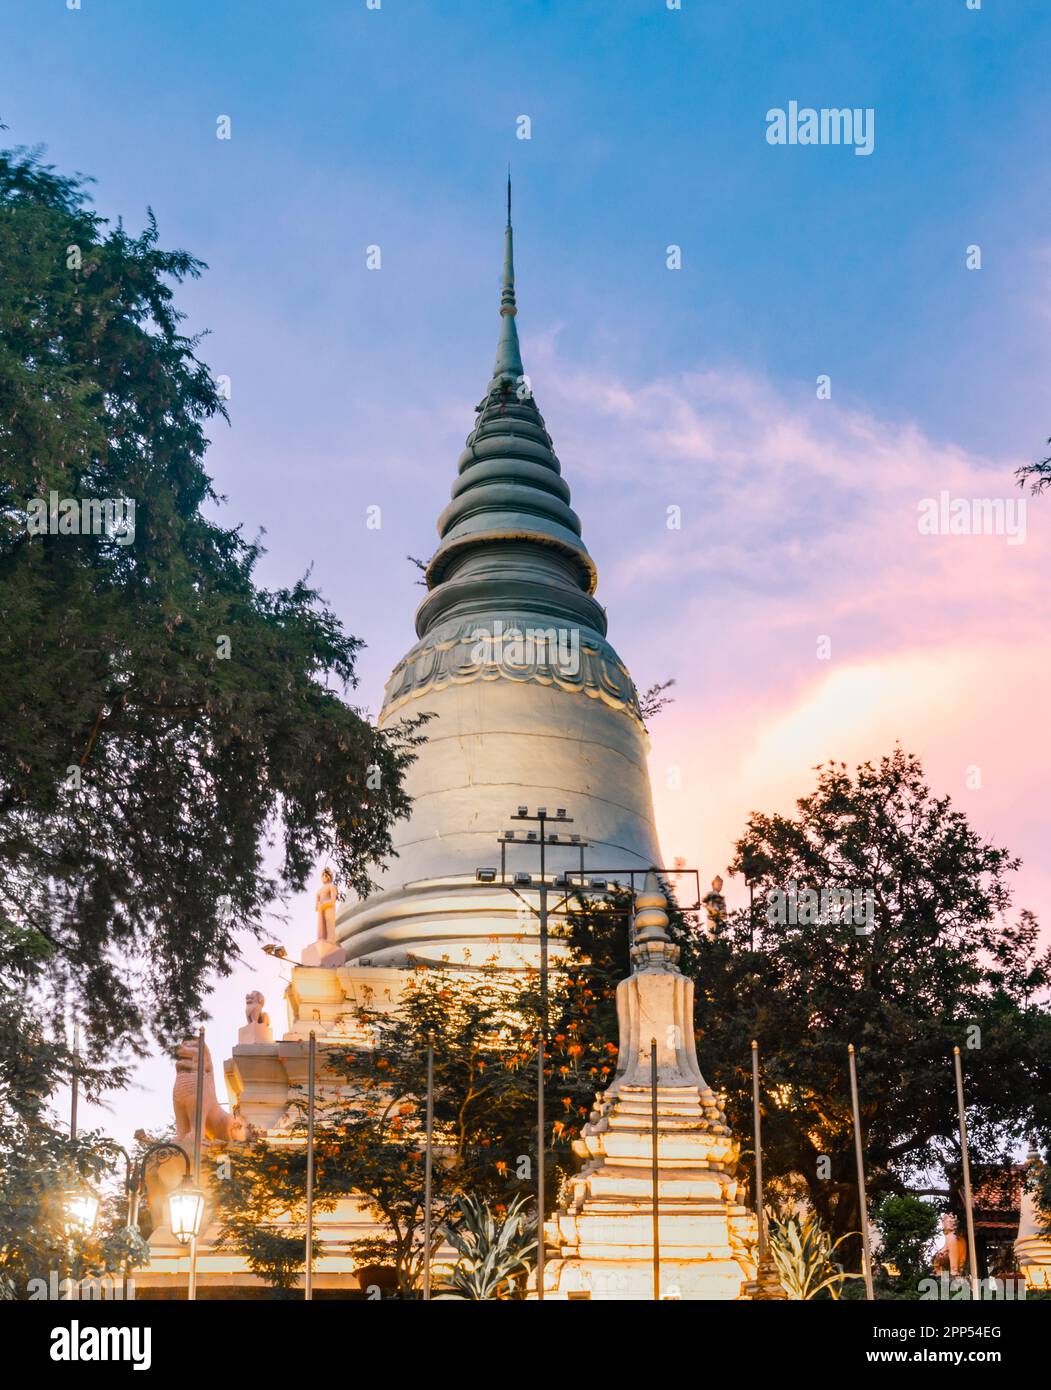 In Wat Penh gardens,a gift from China,covered in green grass,a large working clock,beneath the hilltop pagoda of Wat Phnom,a prominent city landmark,n Stock Photo